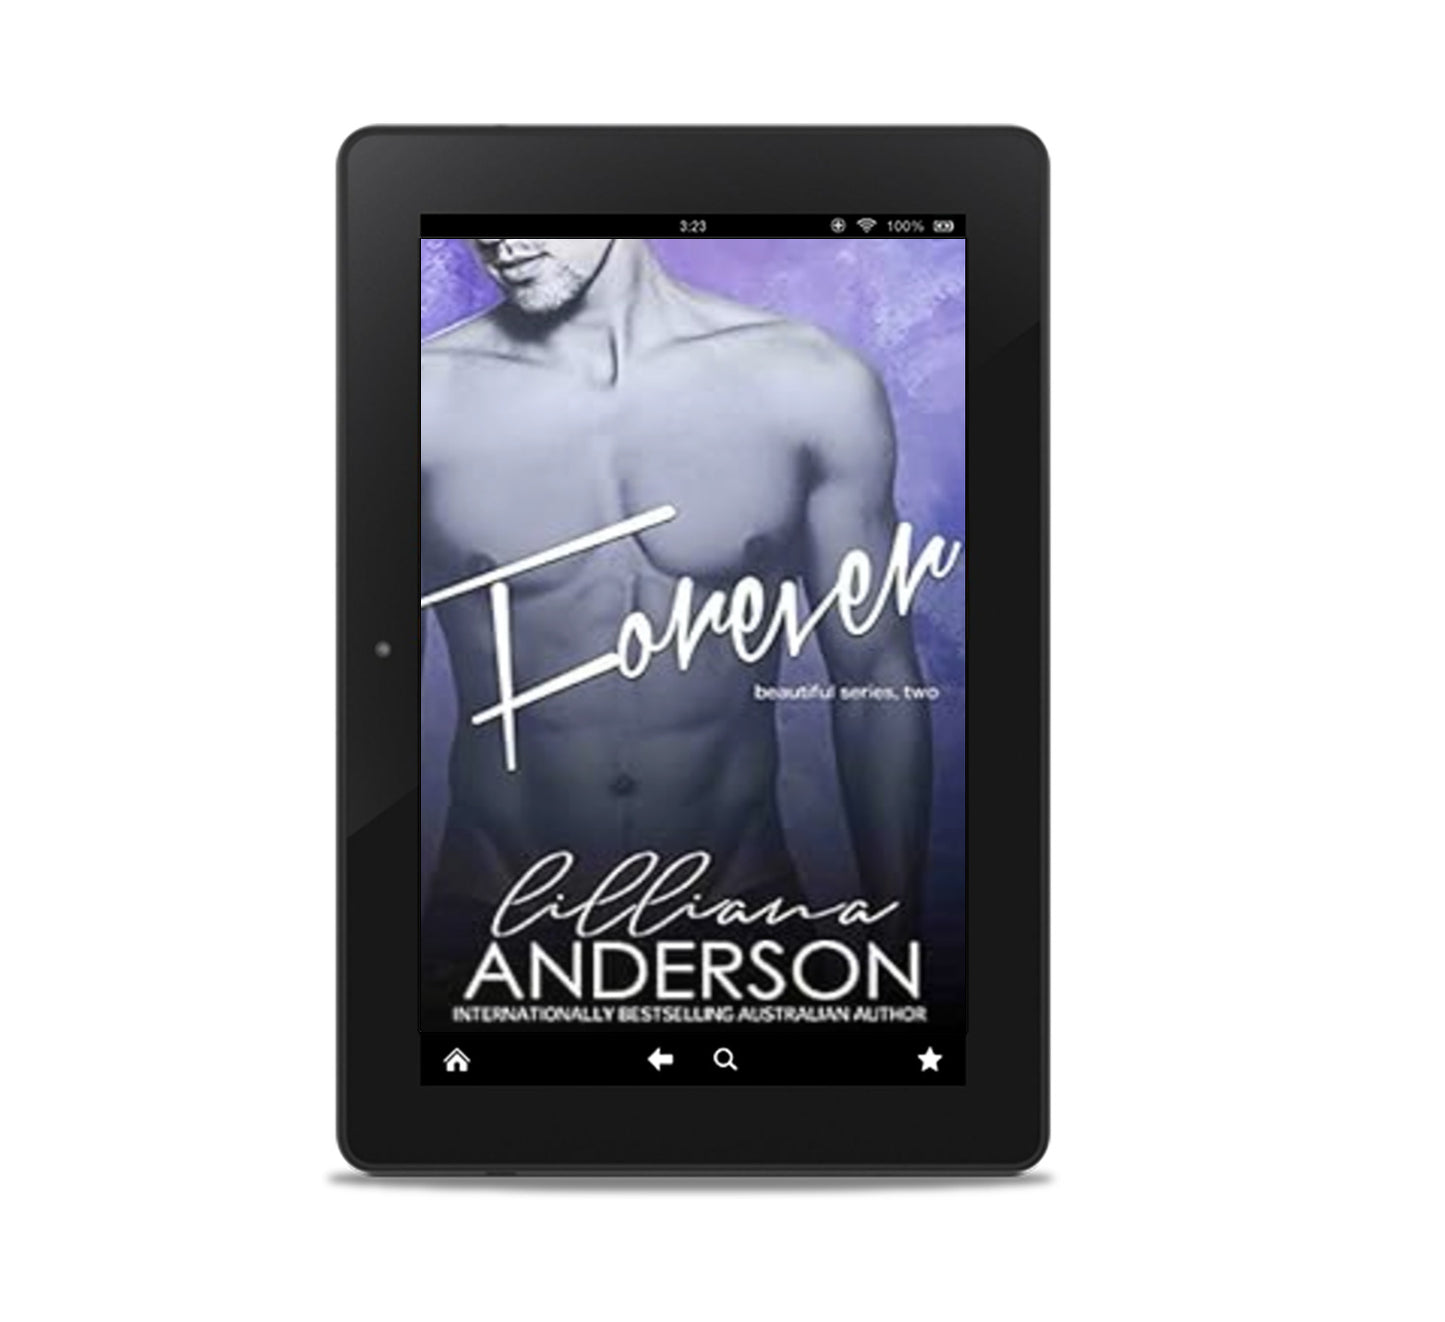 Forever (Beautiful Series, book two)